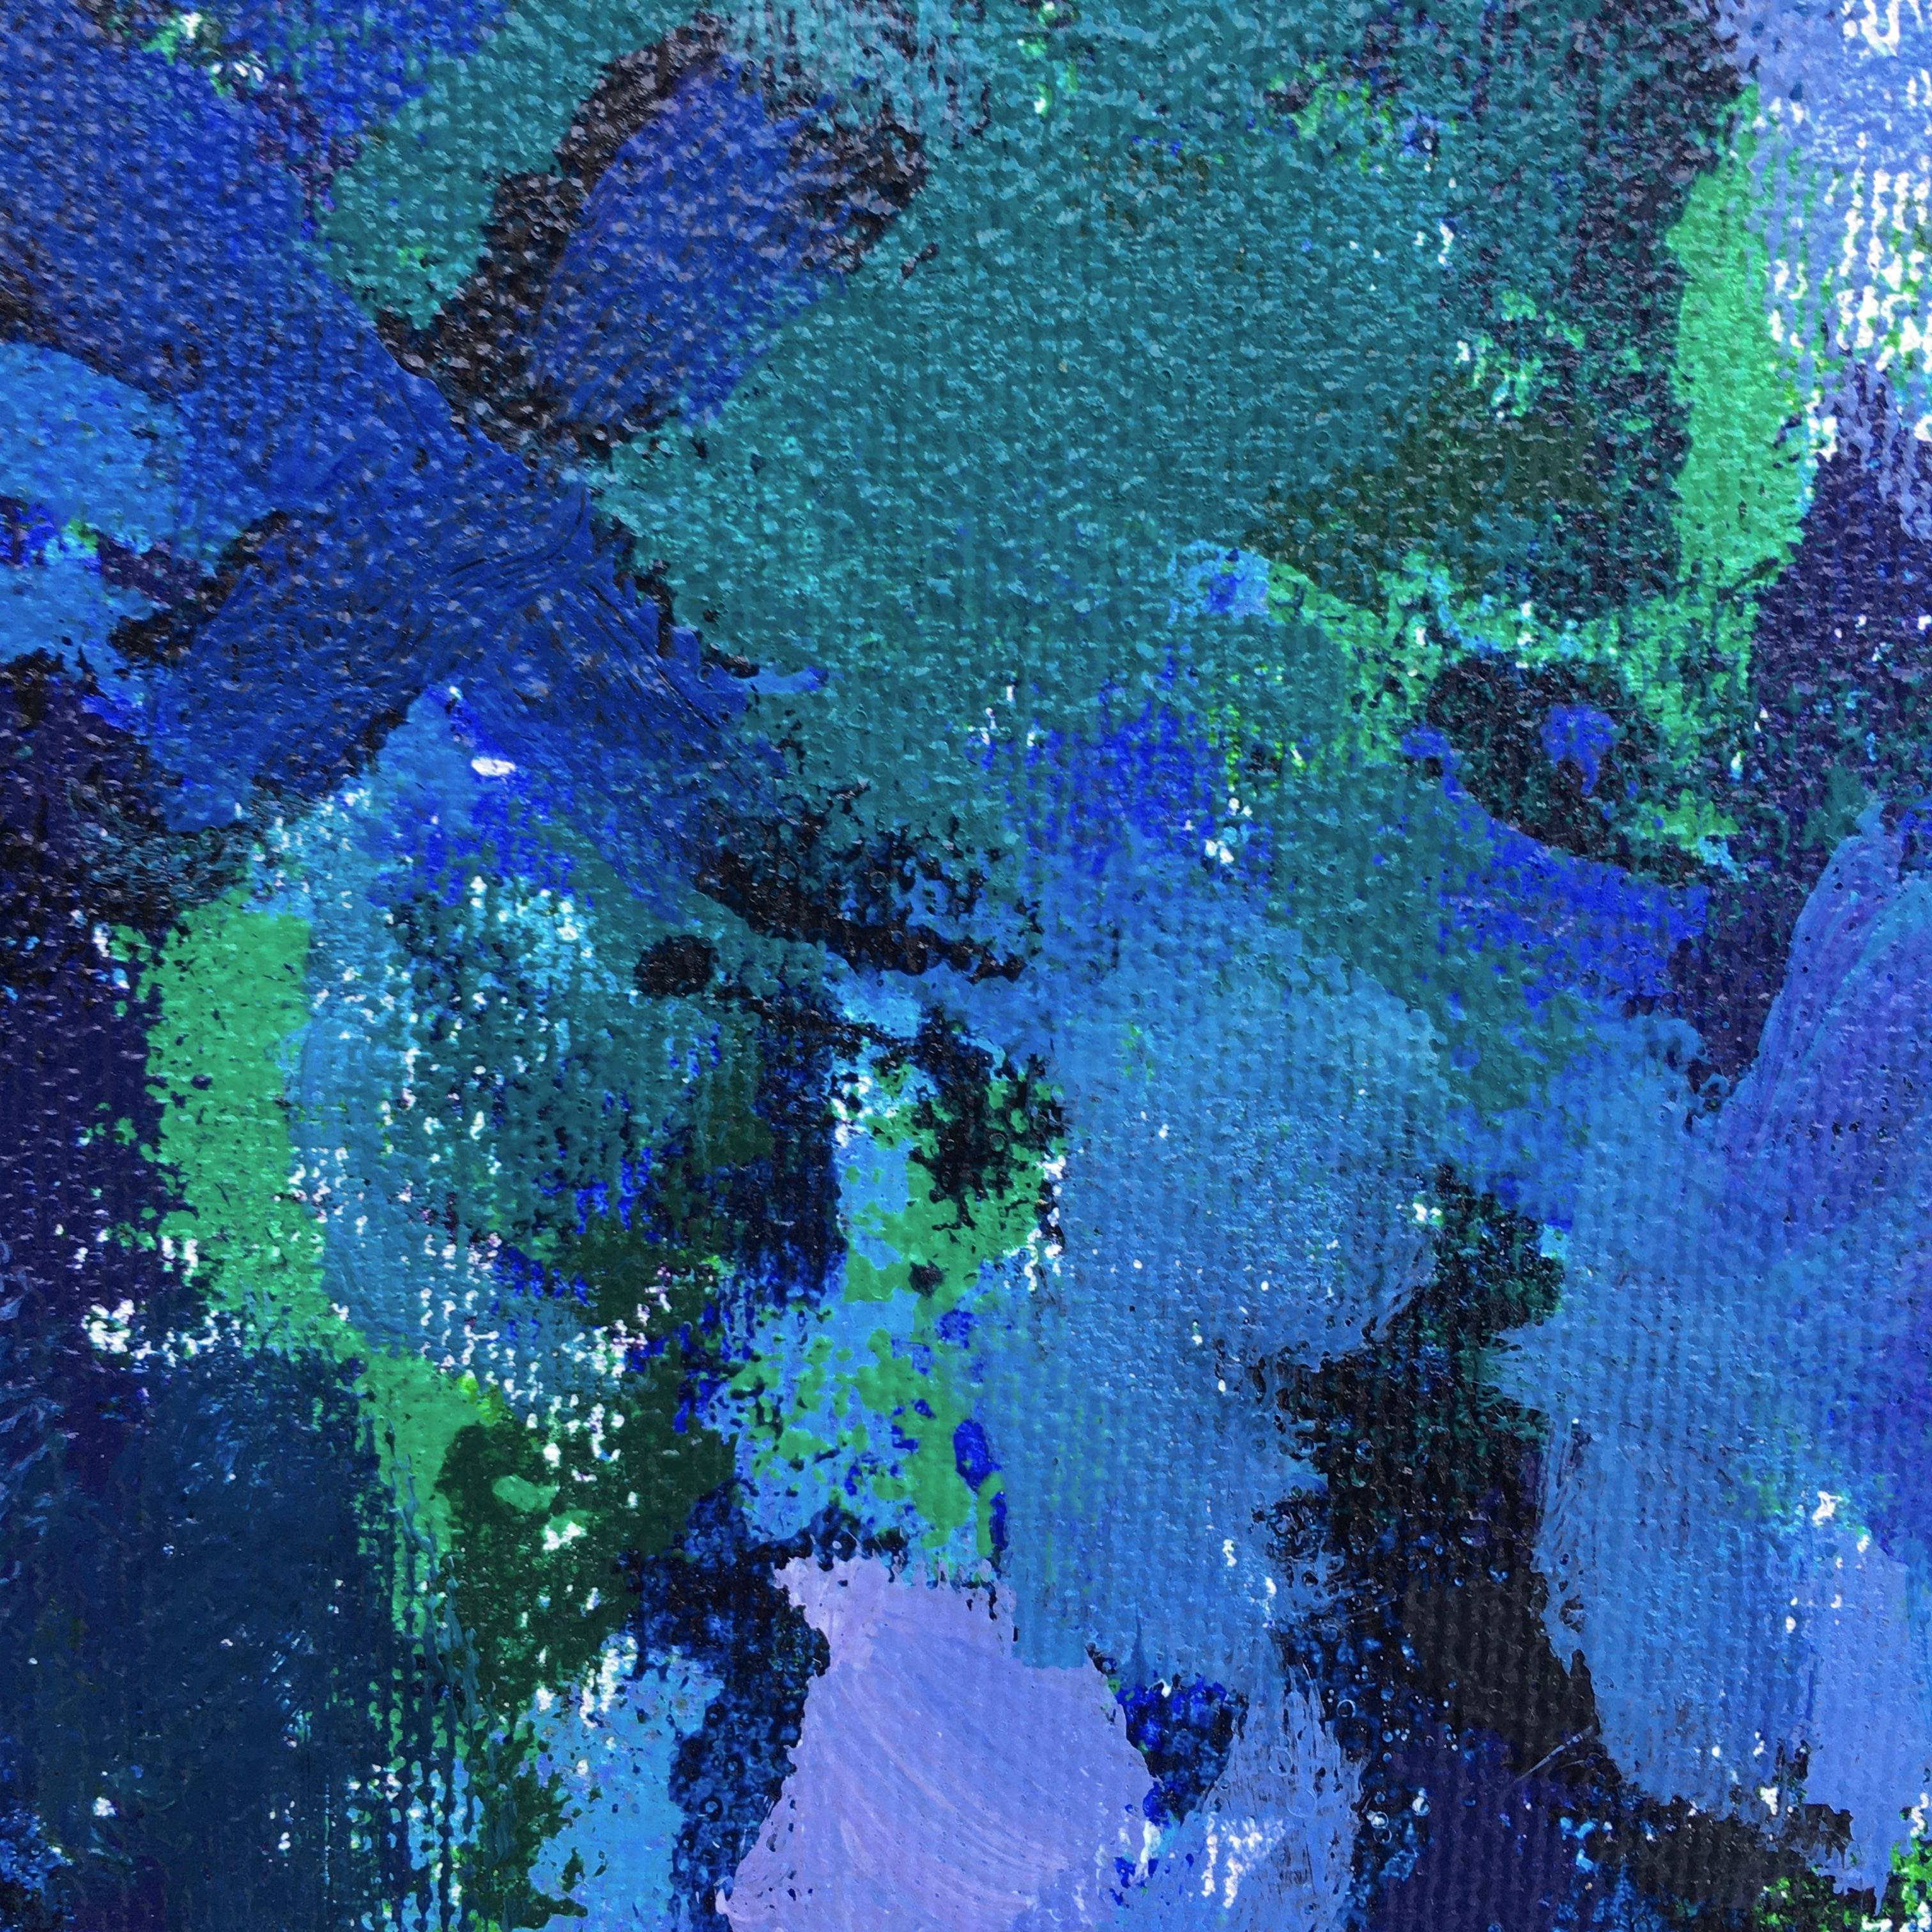 Wimbledon: contemporary abstract impressionist painting w/ blue, green, purple - Painting by Joseph McAleer